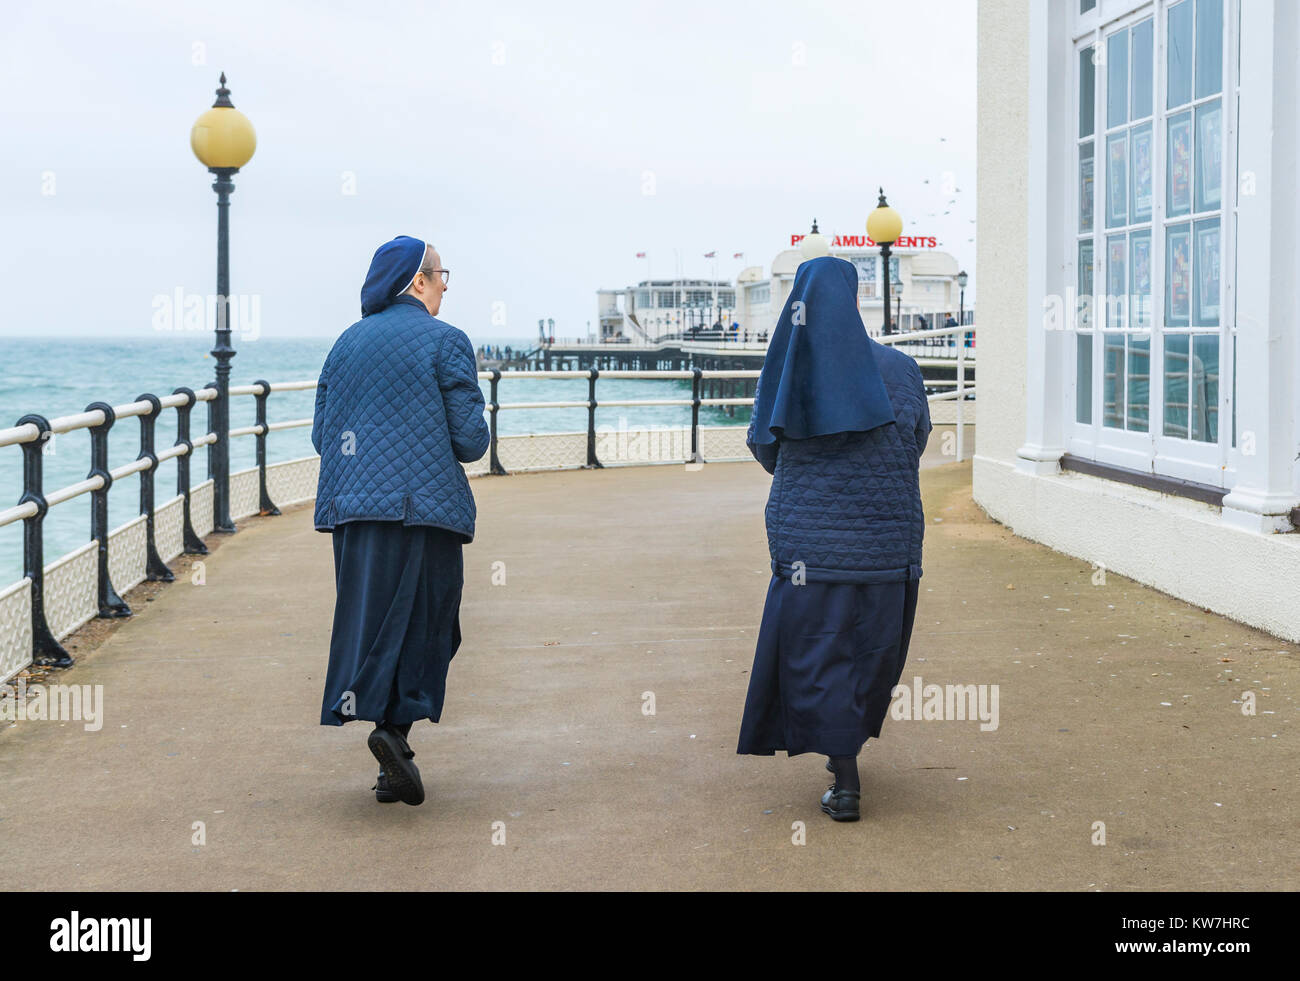 Pair of nuns walking on a pier at the seaside in England, UK. Stock Photo